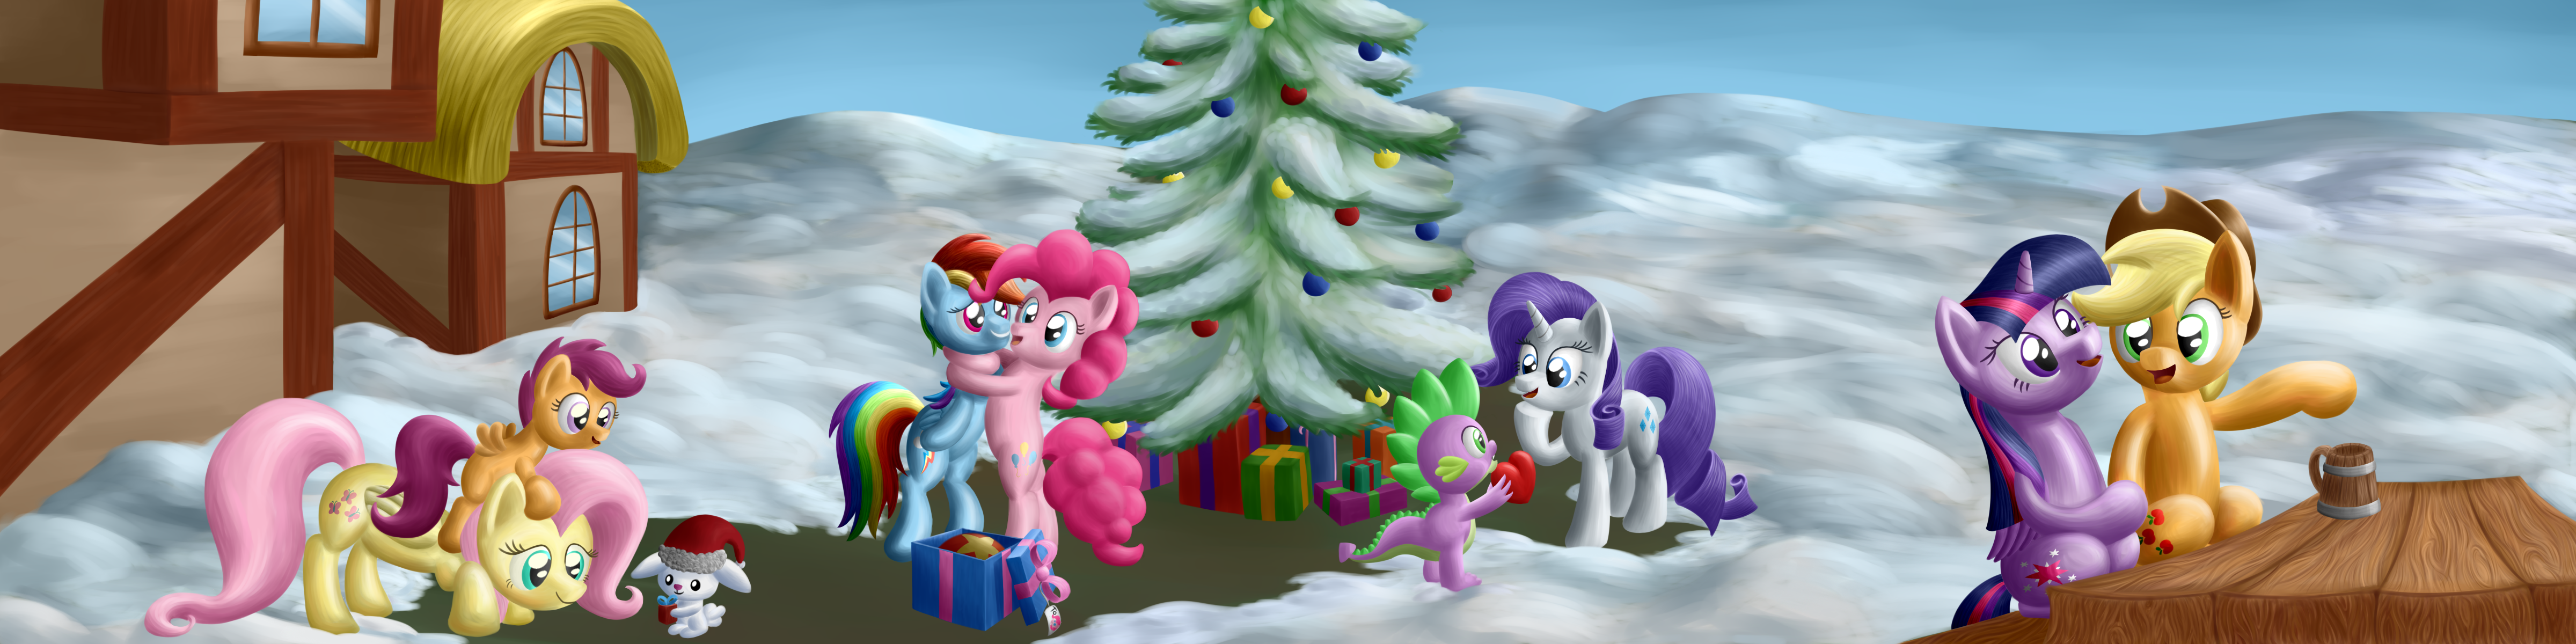 [Bild: a_late_christmas_pony_picture_by_uber__d...8g3l09.png]